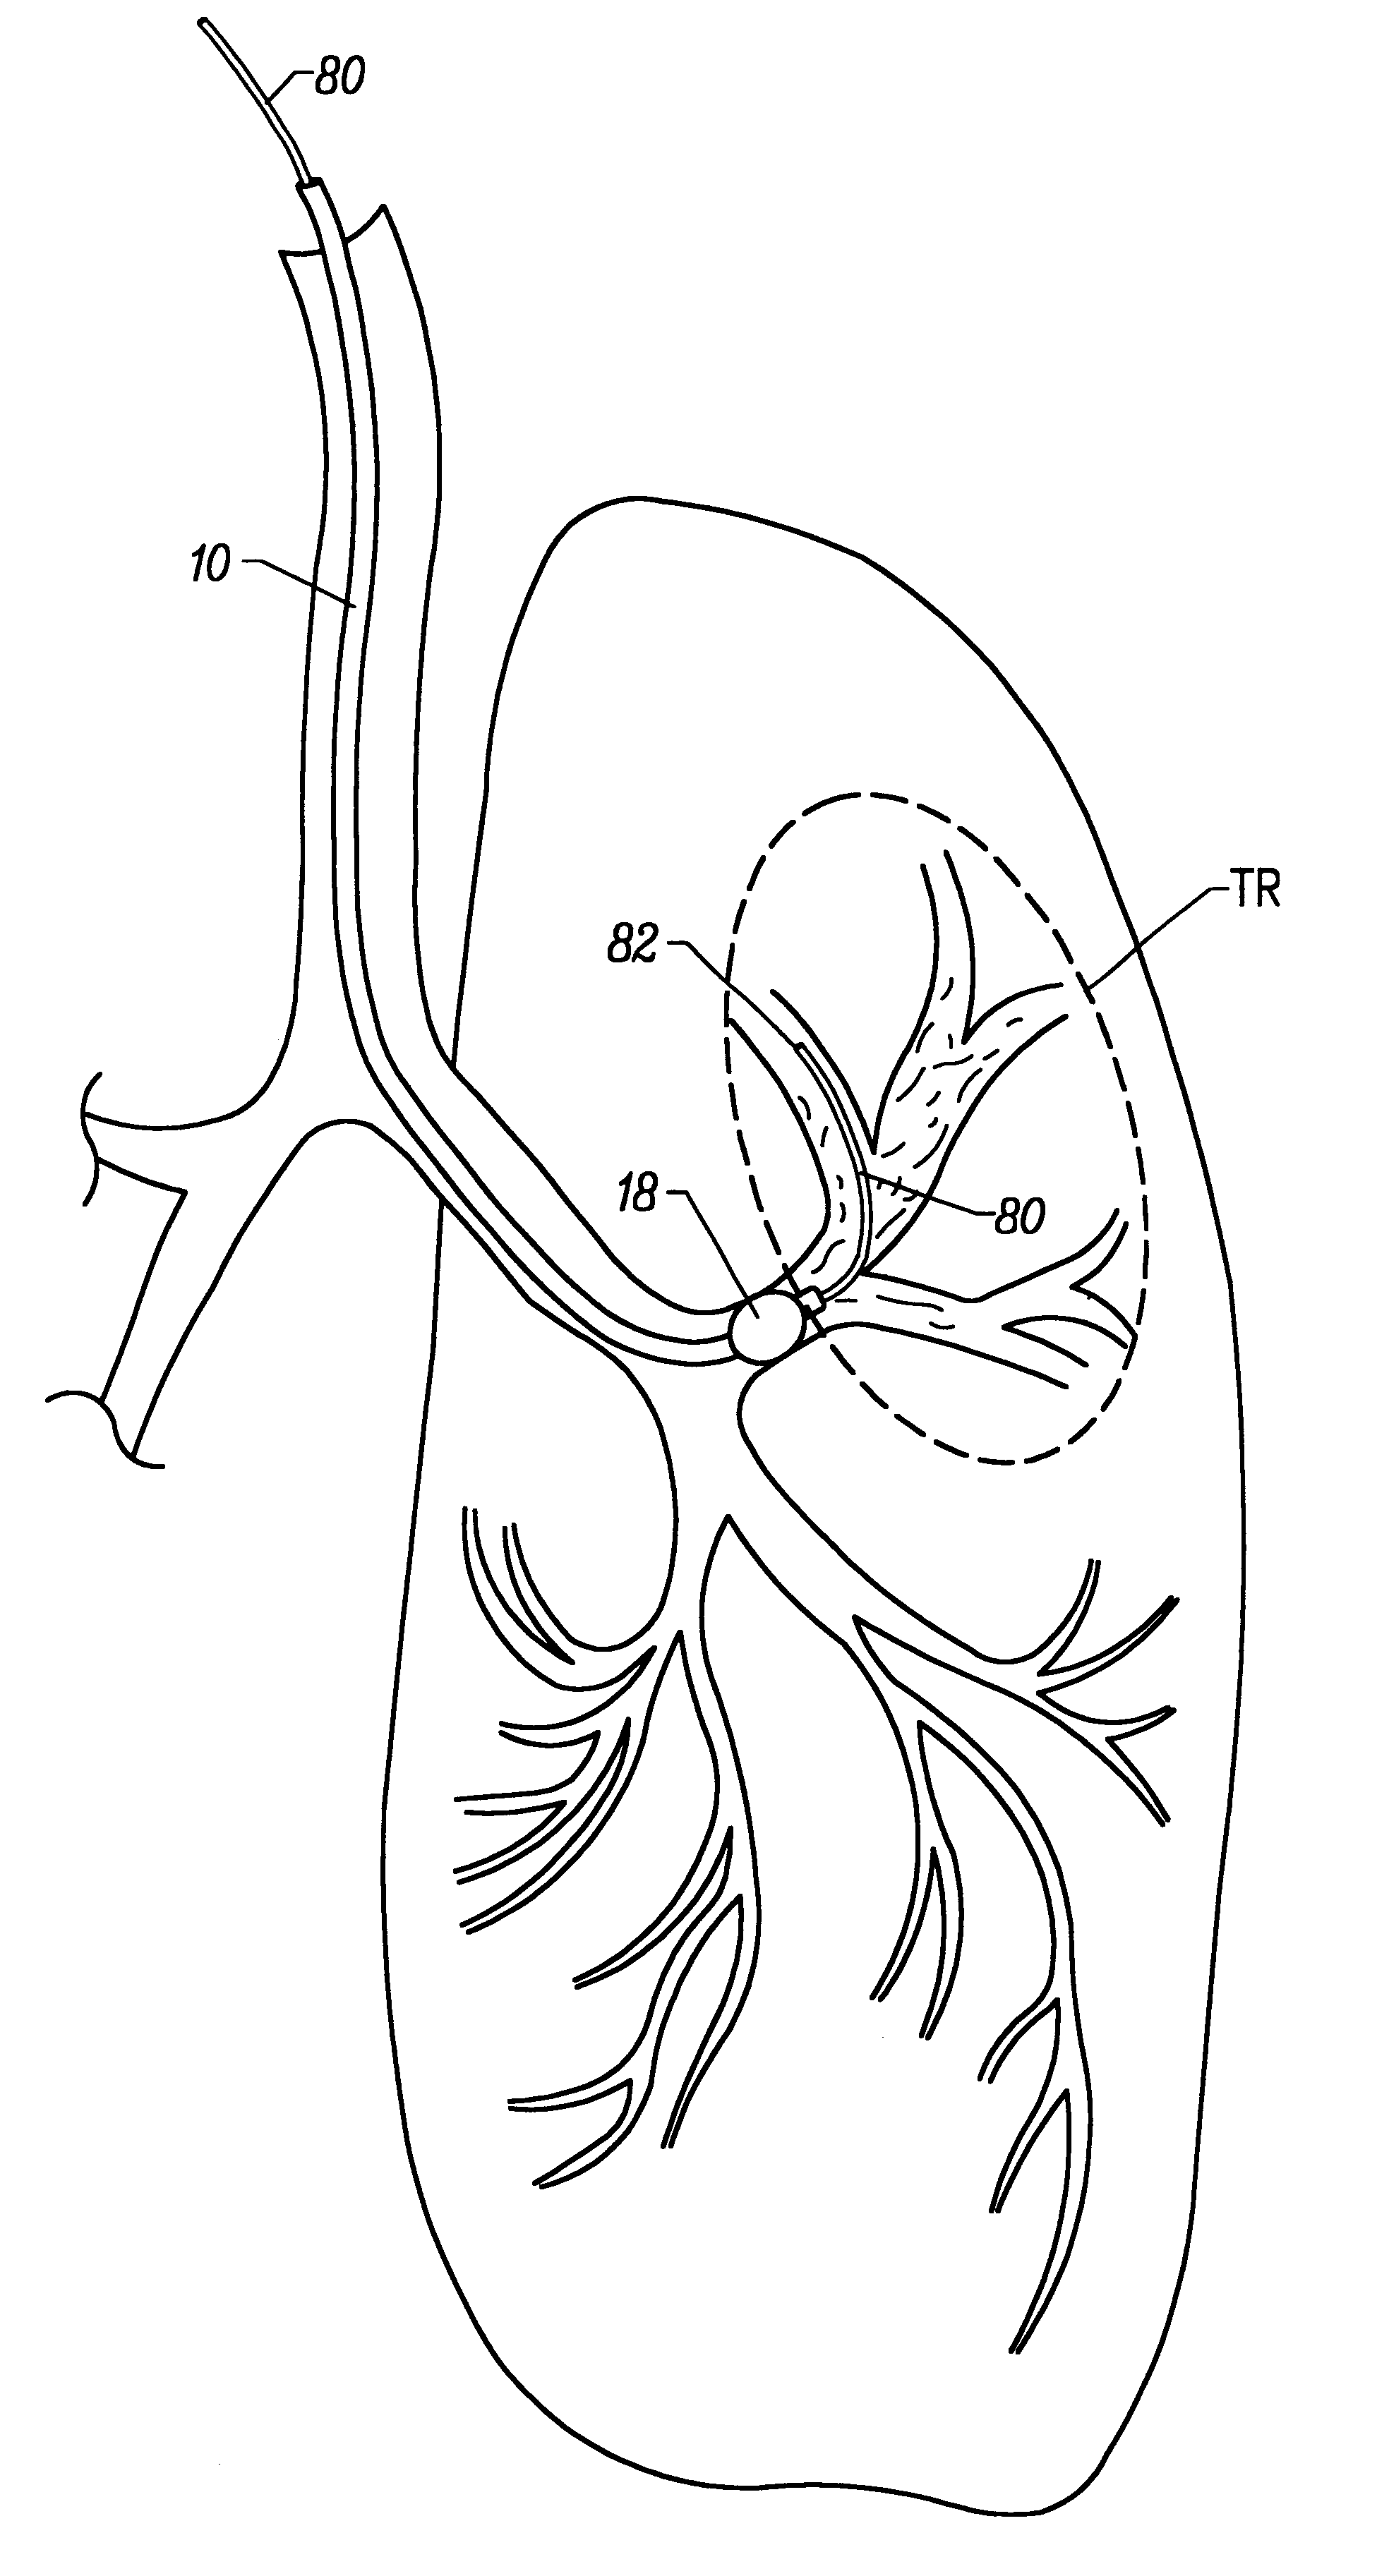 Apparatus and method for isolated lung access